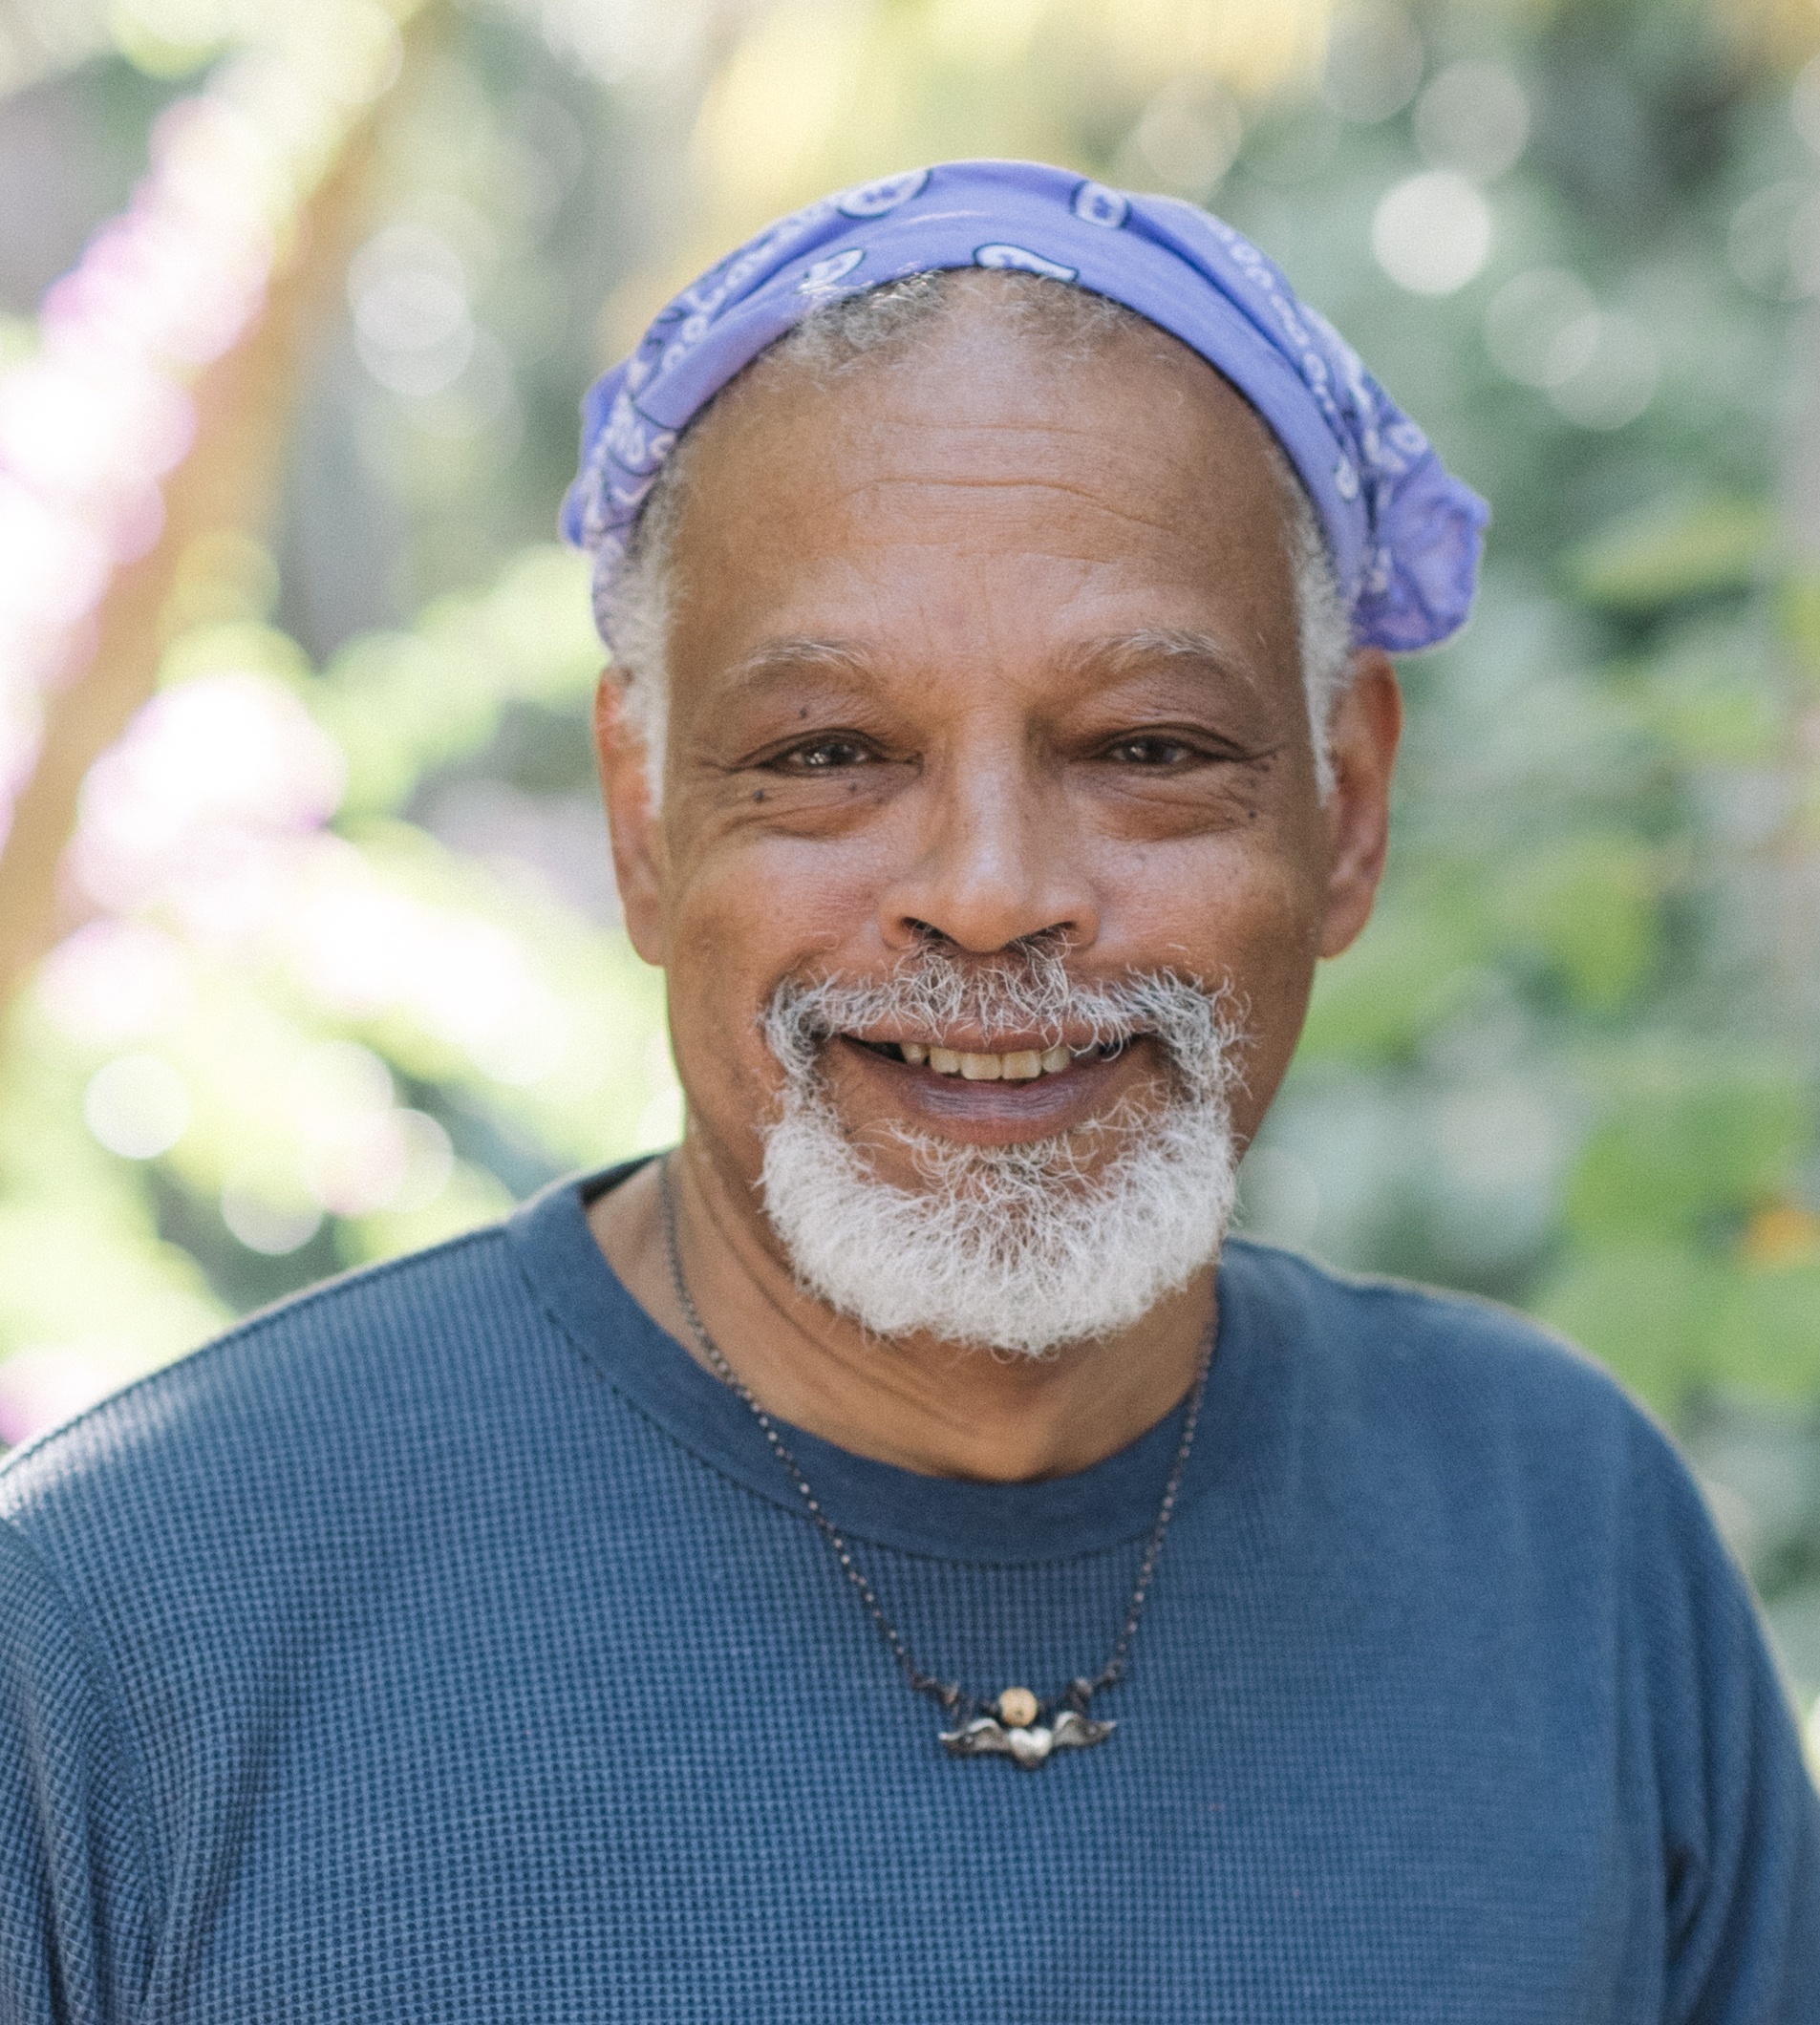 A headshot of Ishmael Houston-Jones, a man with light brown skin and a gray mustache and goatee. He smiles broadly against a background of trees and leaves. He wears a lilac bandana around the crown of his head and a blue shirt. Photo by Mark Poucher